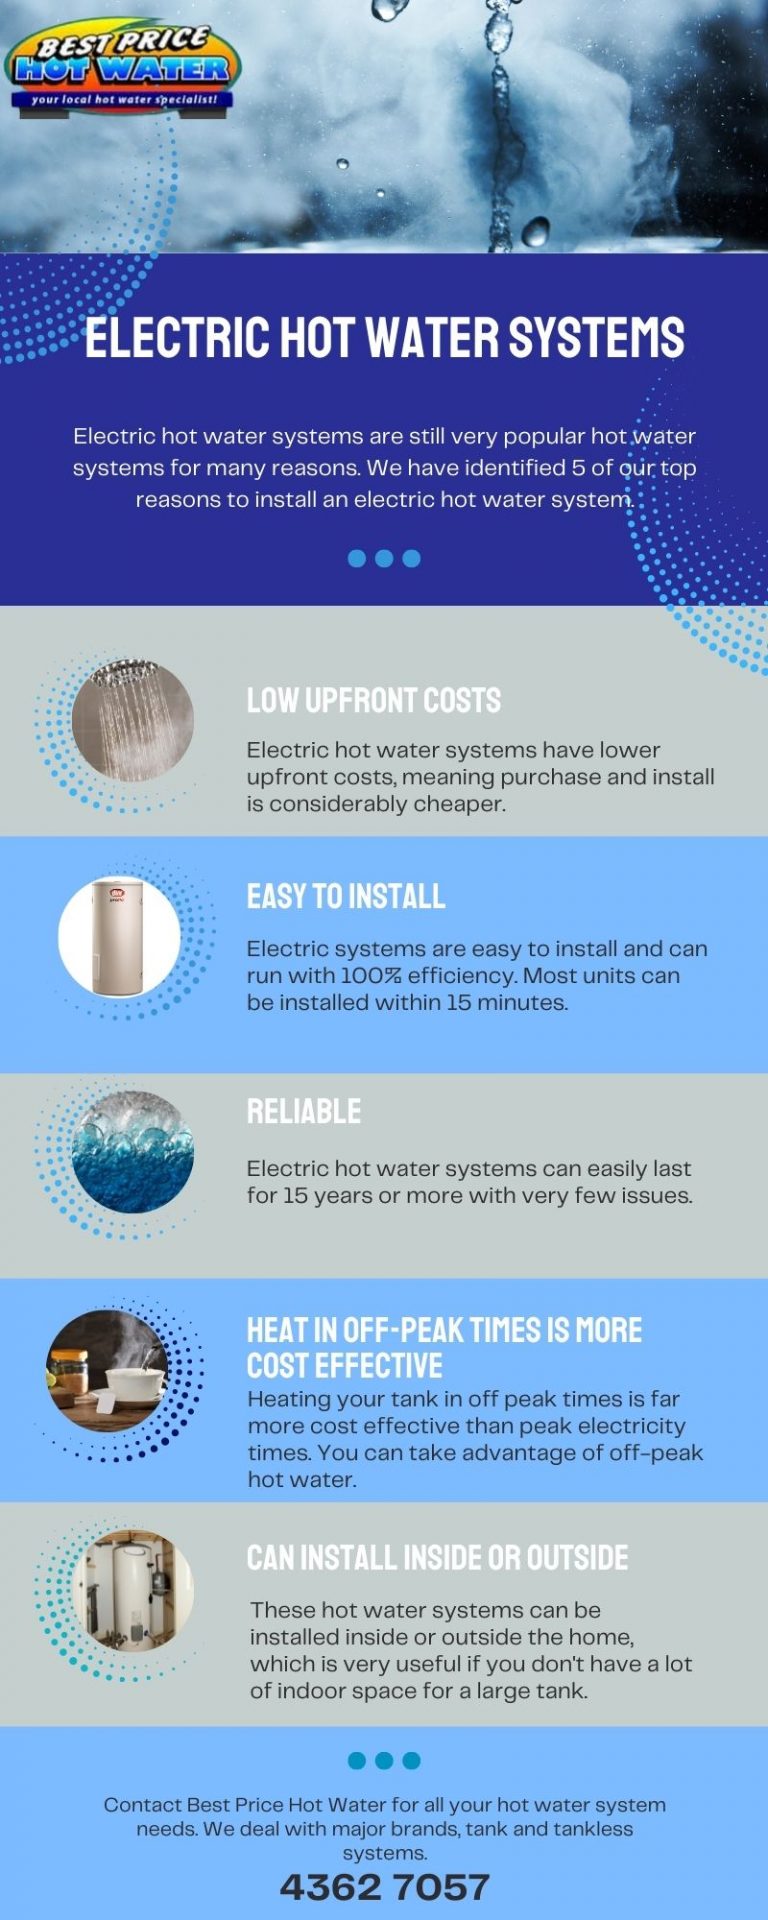 benefits of electric hot water systems